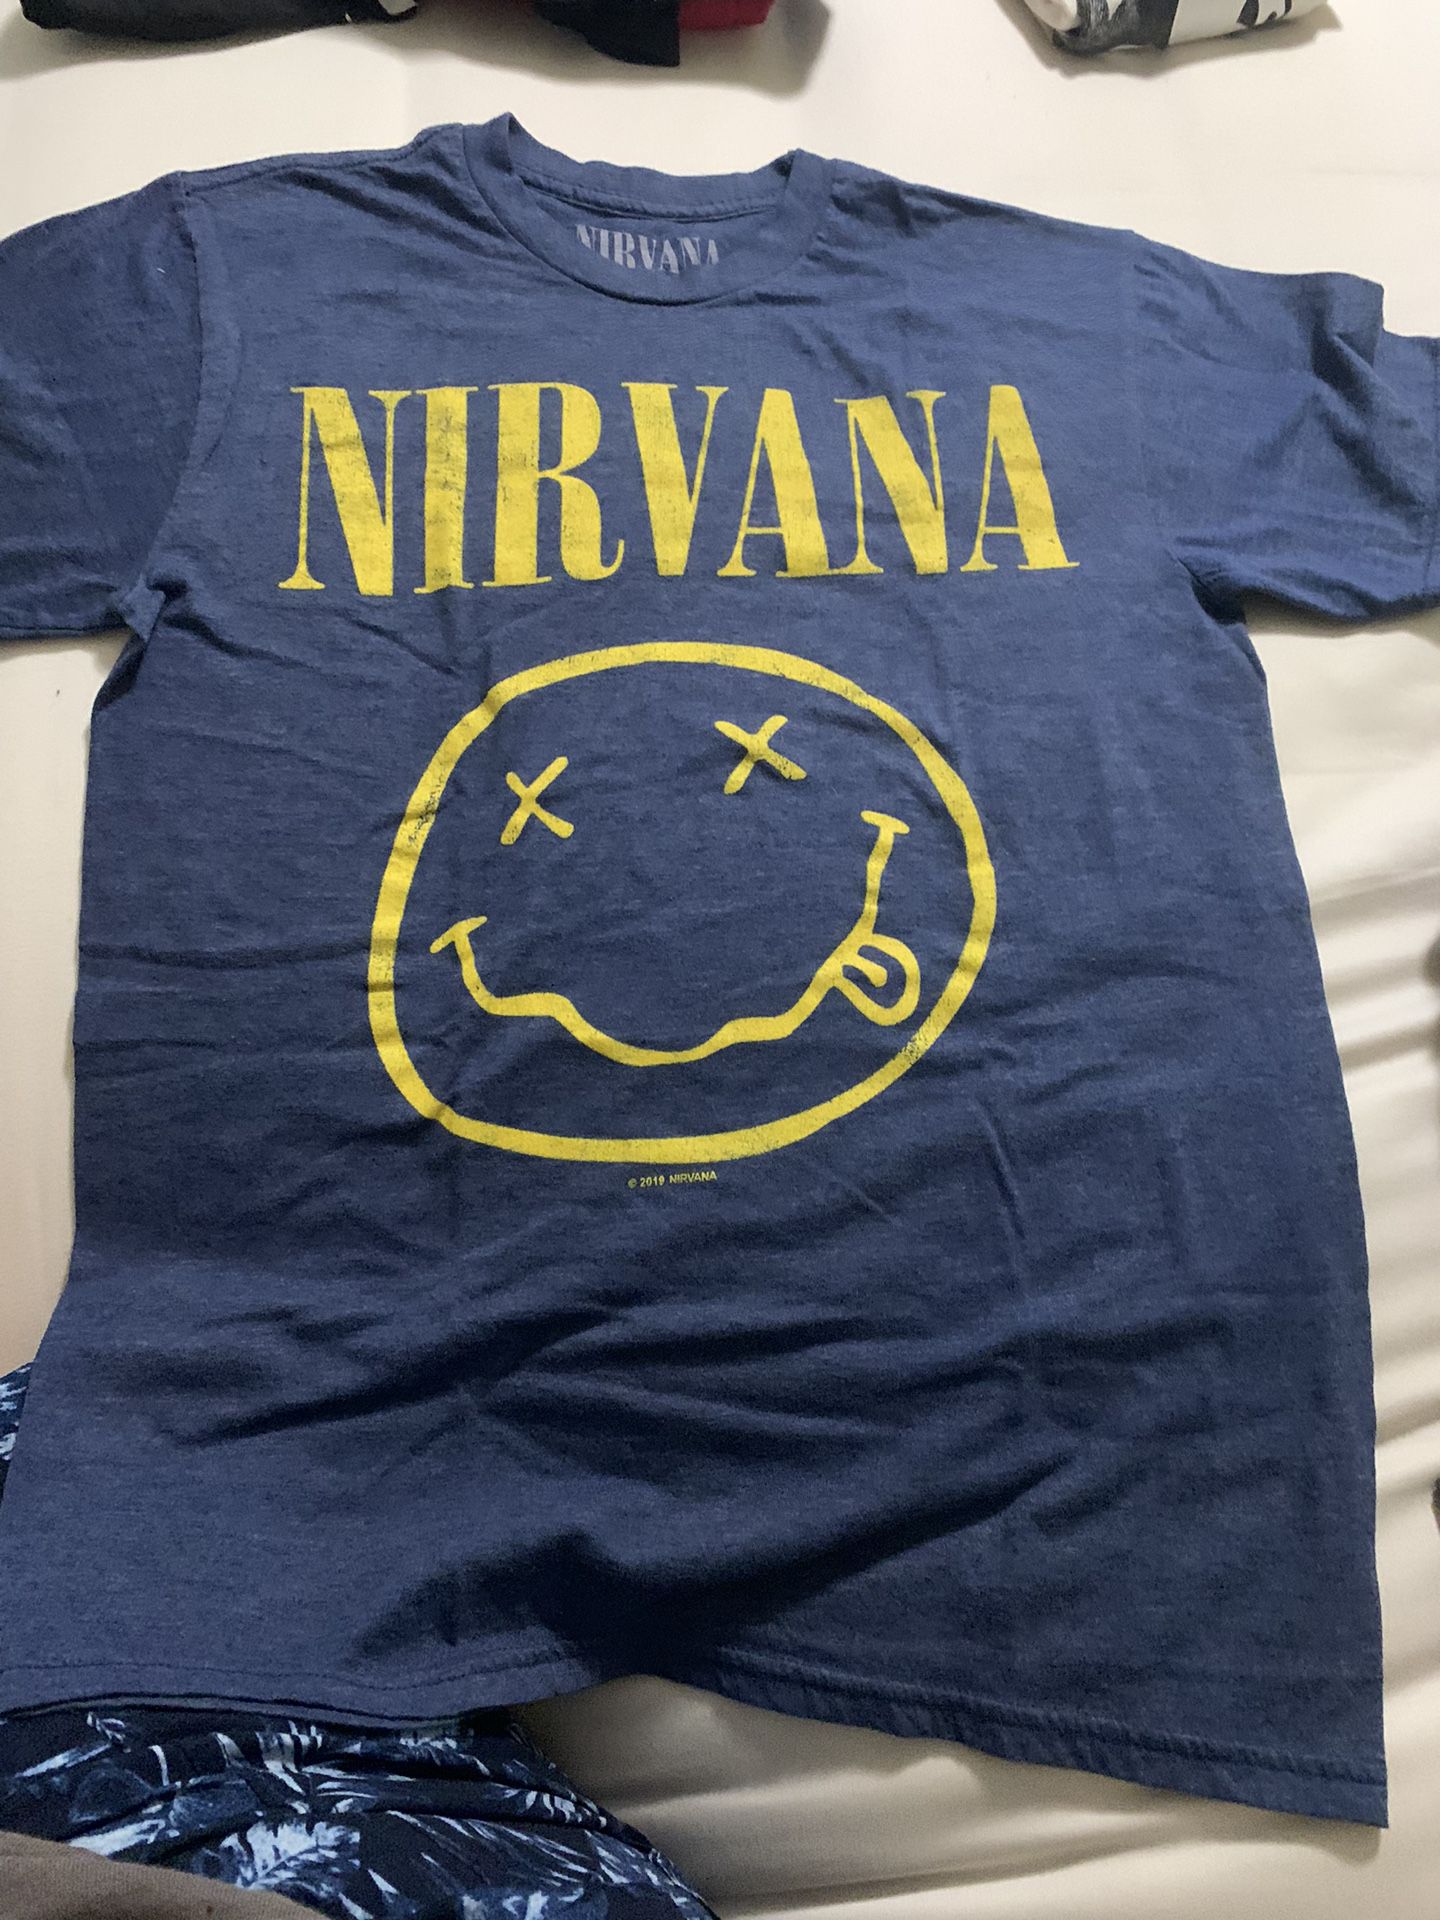 Nirvana Small T-shirt $8 Great Condition 